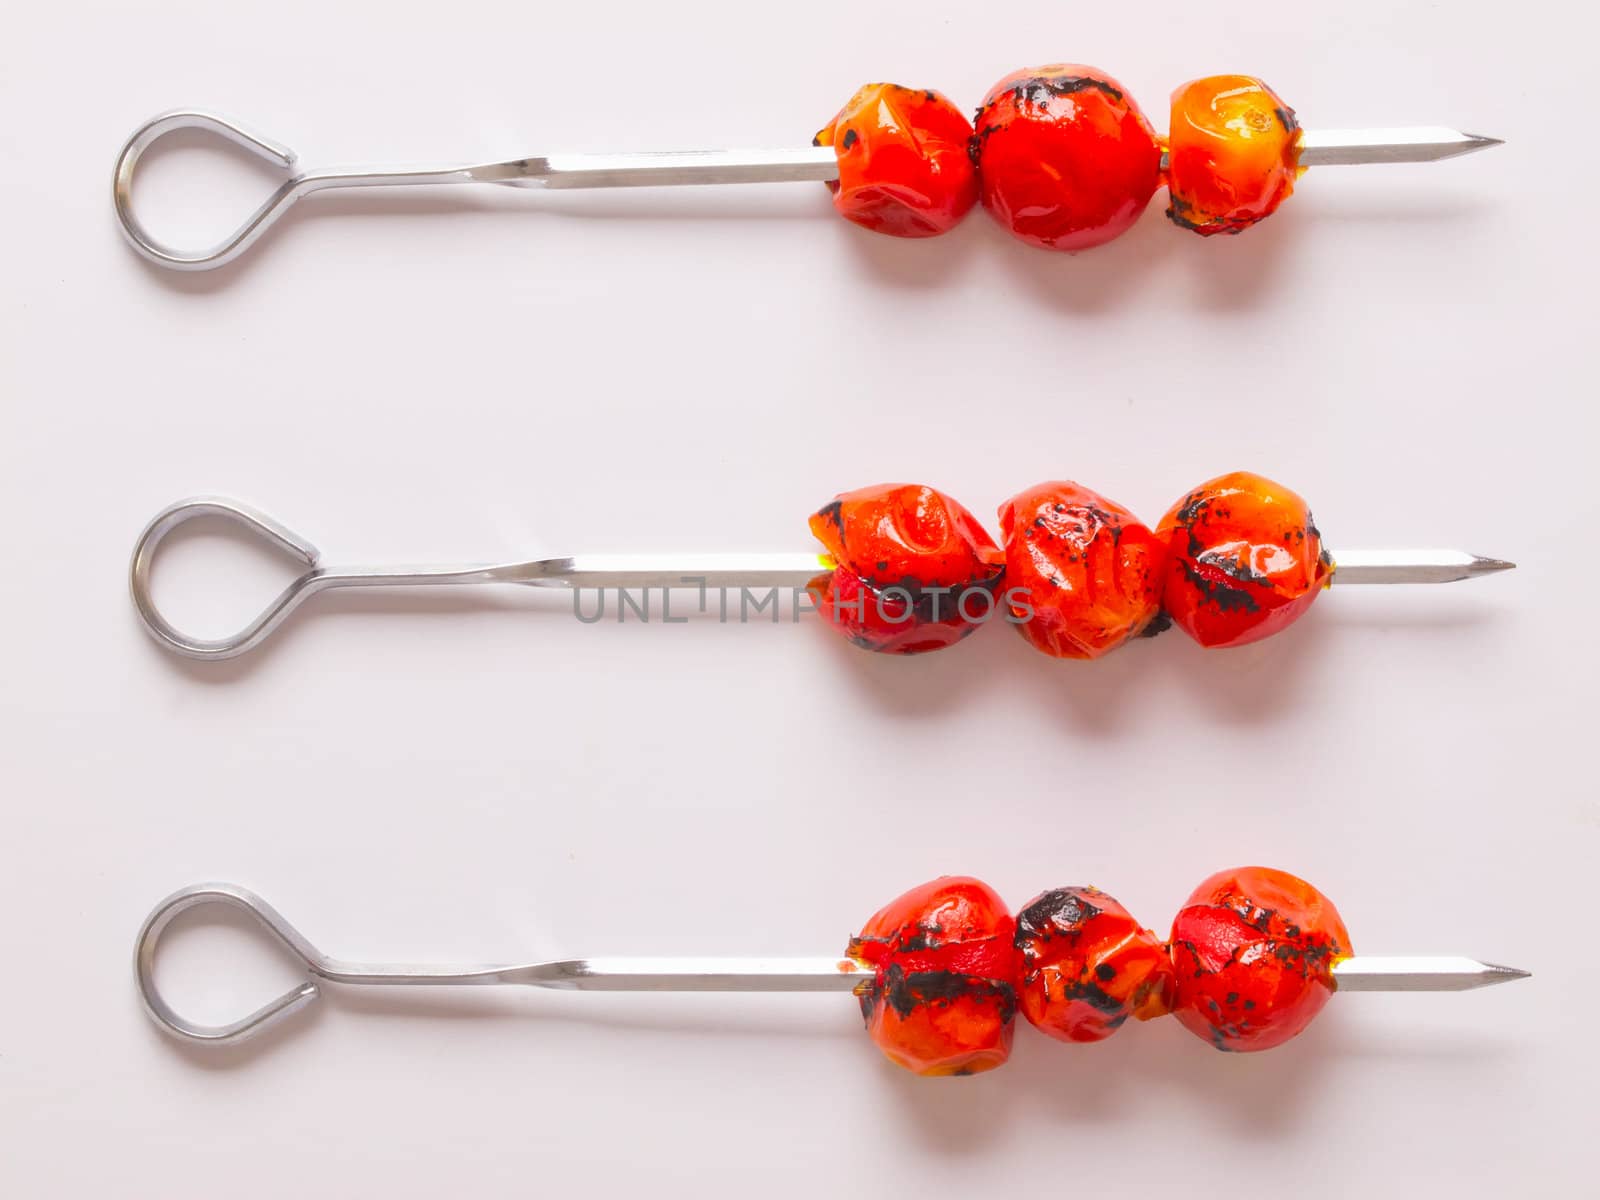 grilled cherry tomato skewers